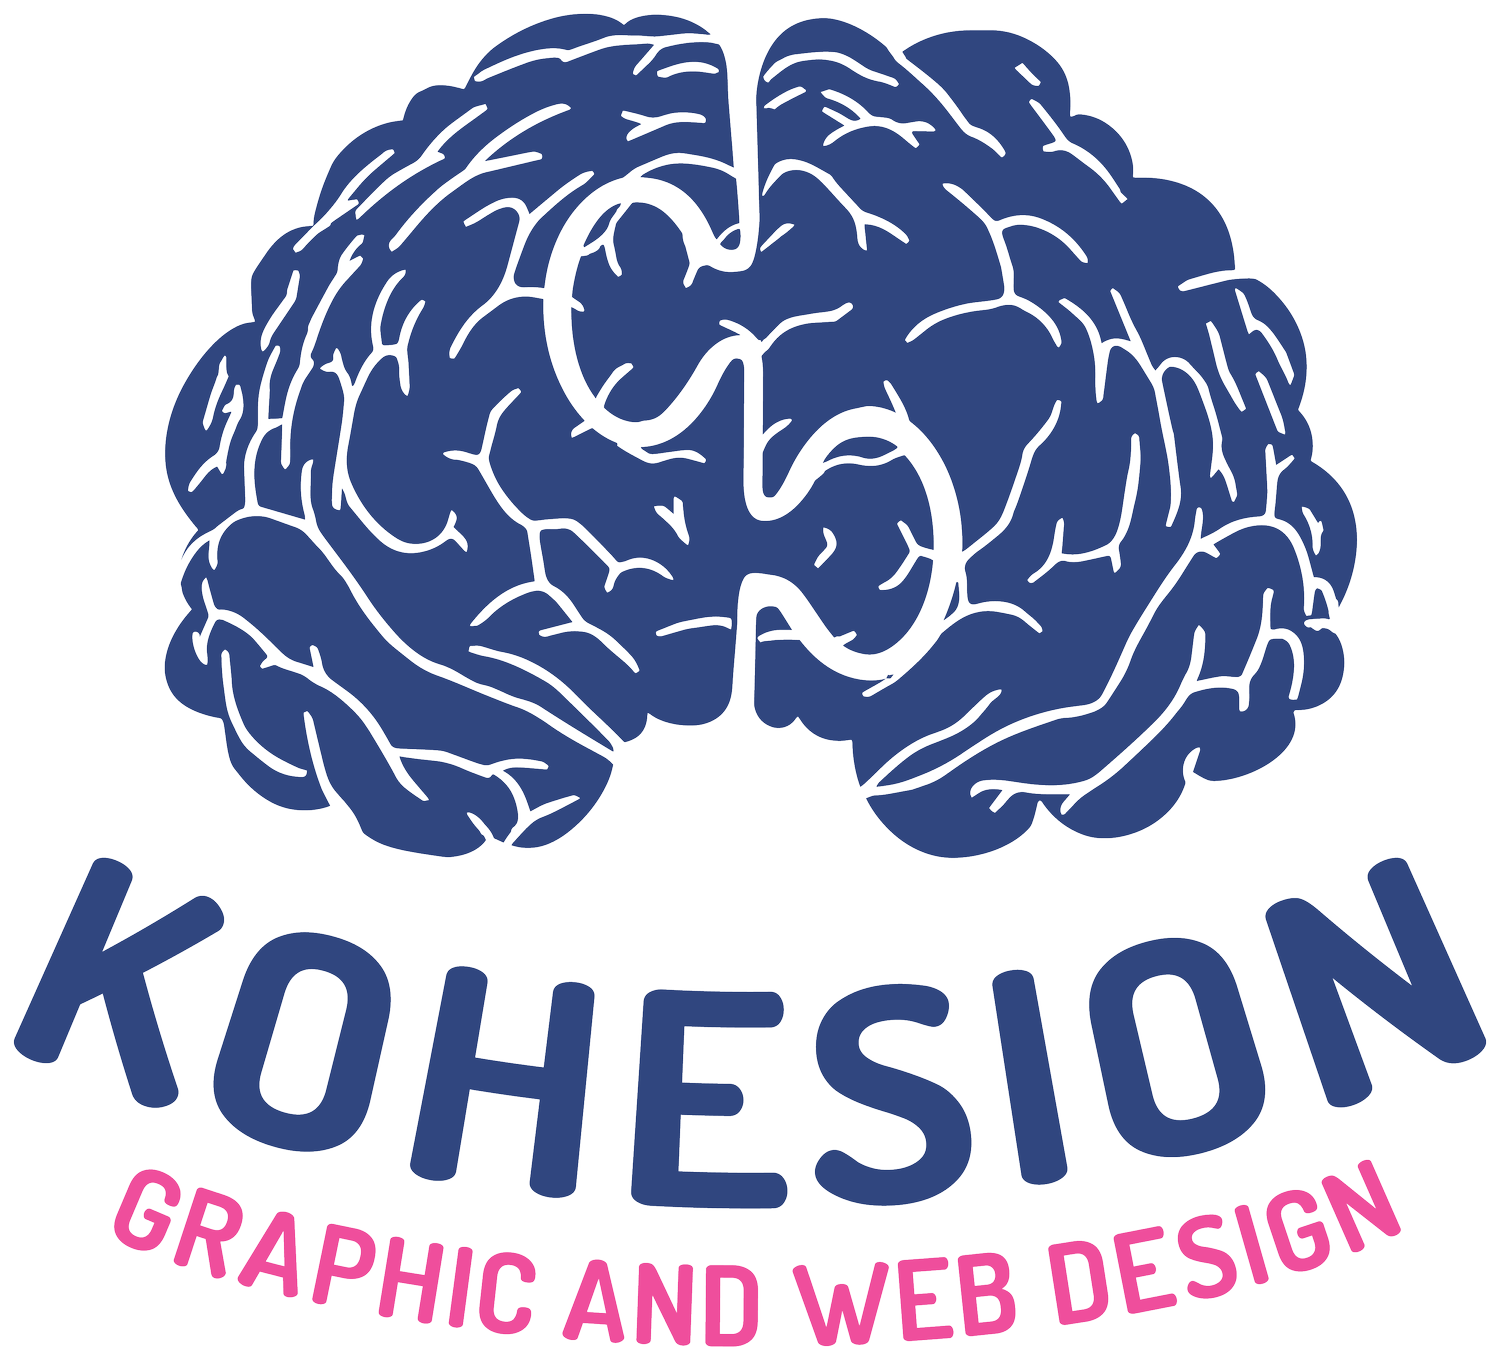 KOHESION GRAPHIC AND WEB DESIGN IN THE ADELAIDE HILLS